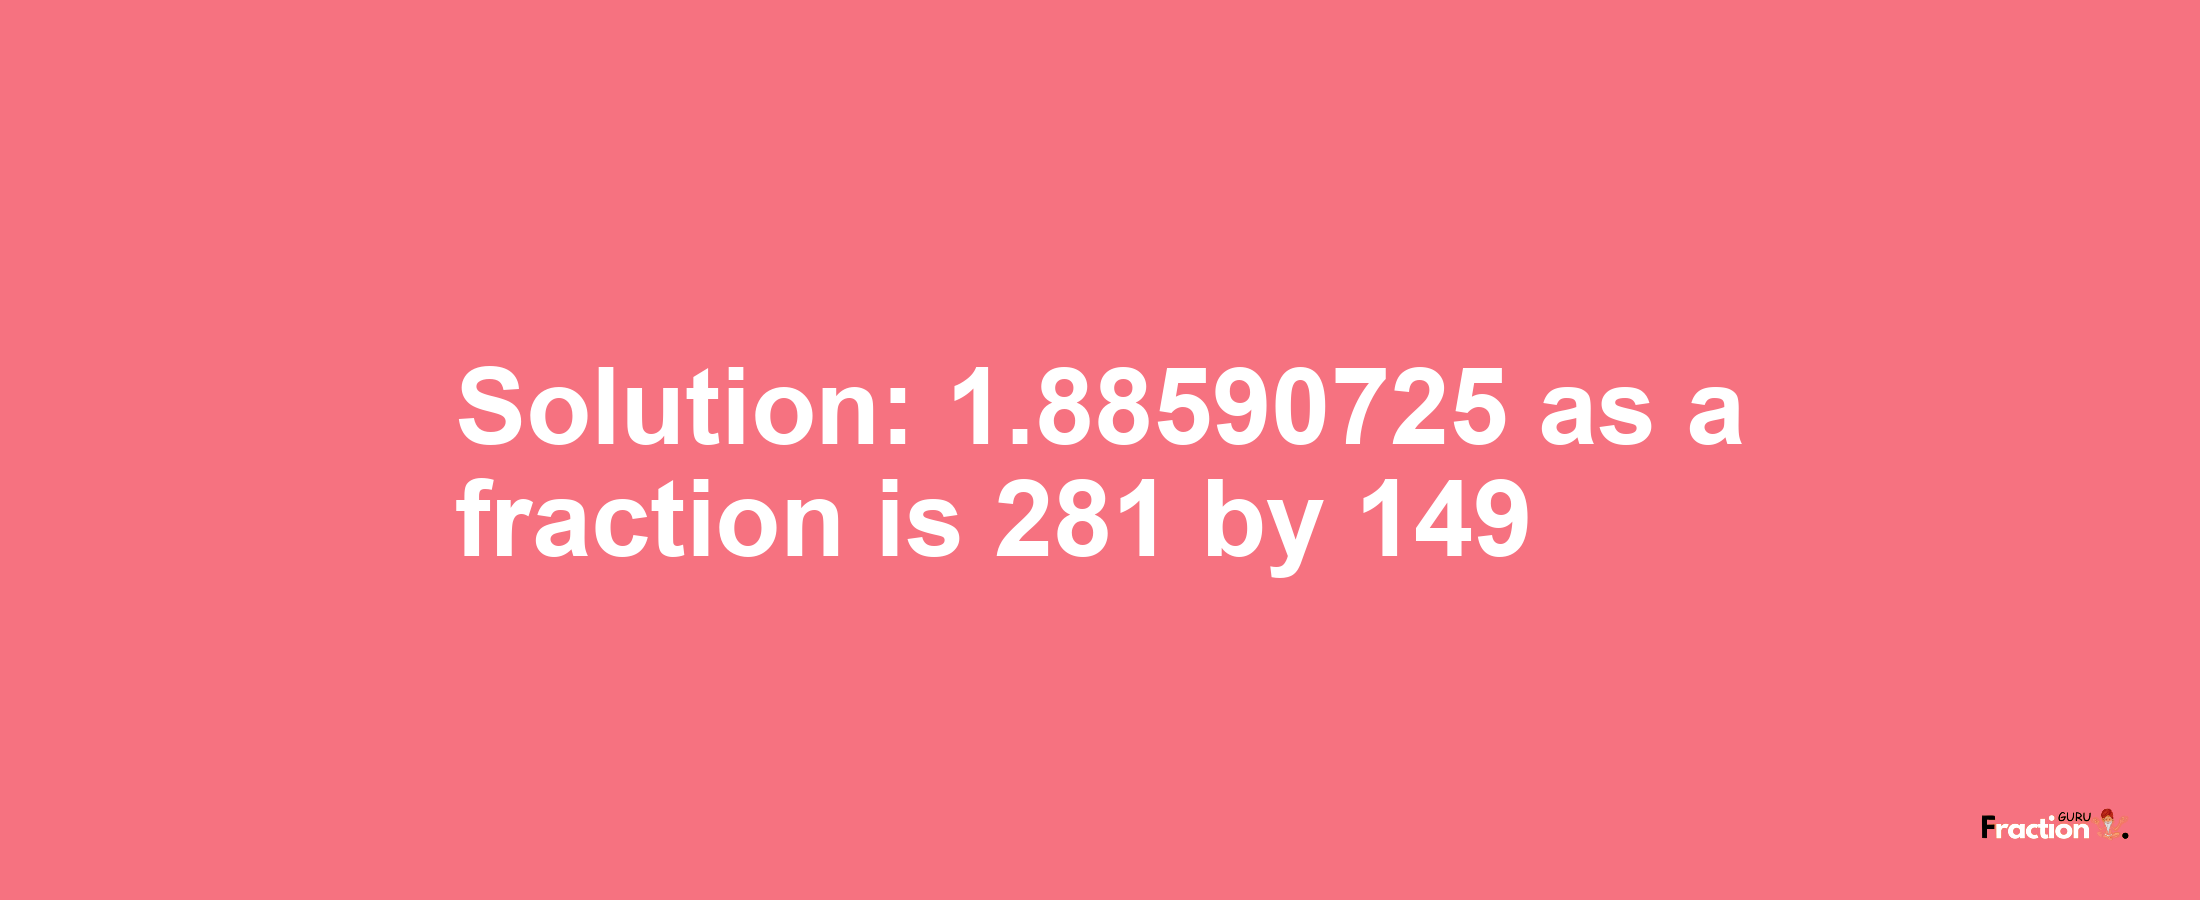 Solution:1.88590725 as a fraction is 281/149